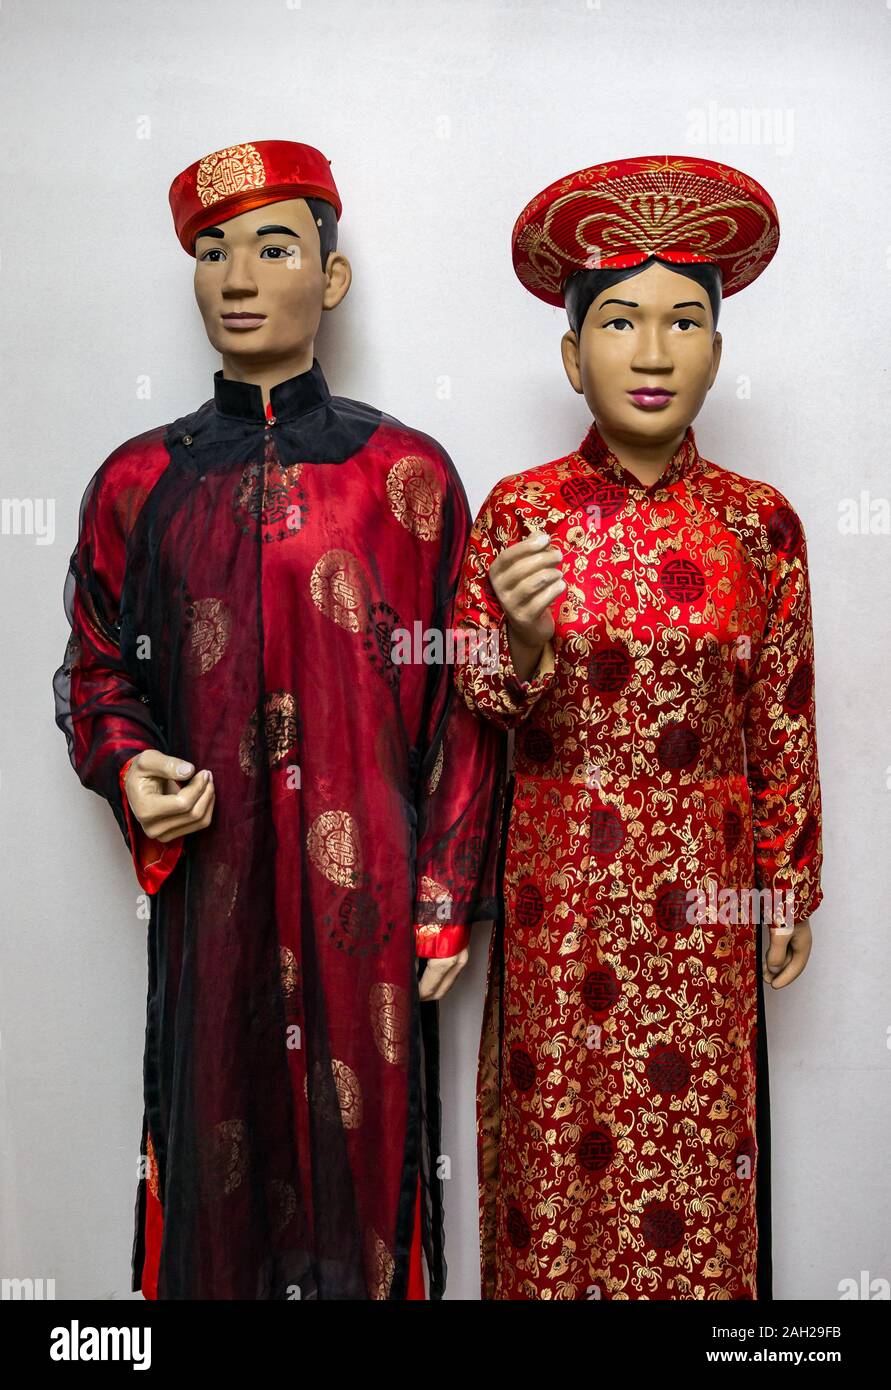 Models in exhibit wearing traditional Chinese style red silk robes, Thai Nguyen museum of ethnology, Northern Vietnam, Asia Stock Photo